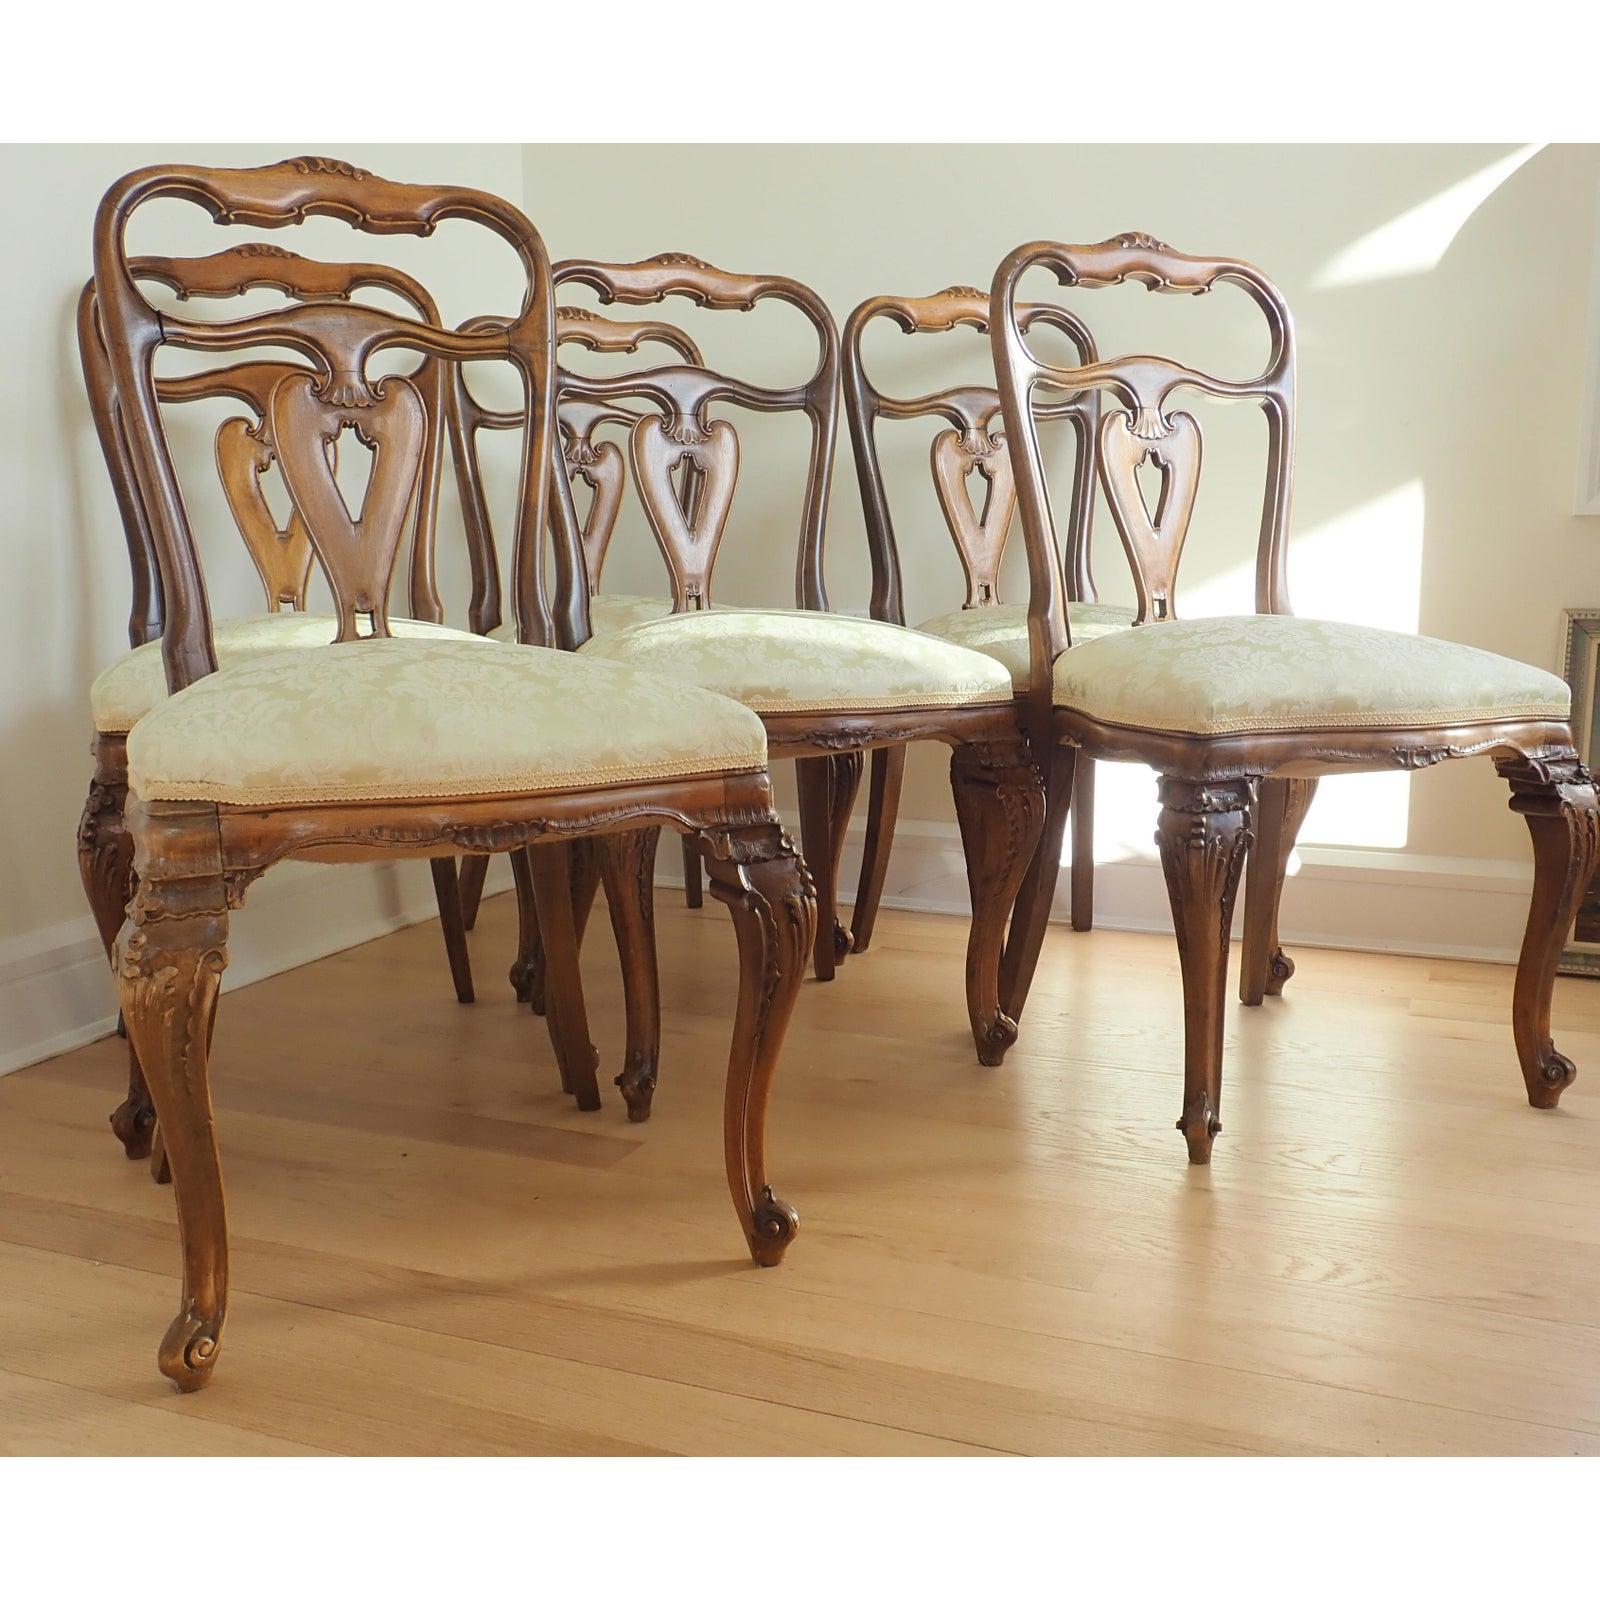 Hand-Carved Set Of 6 Carved Italian Walnut Rococo Dining Room Chairs